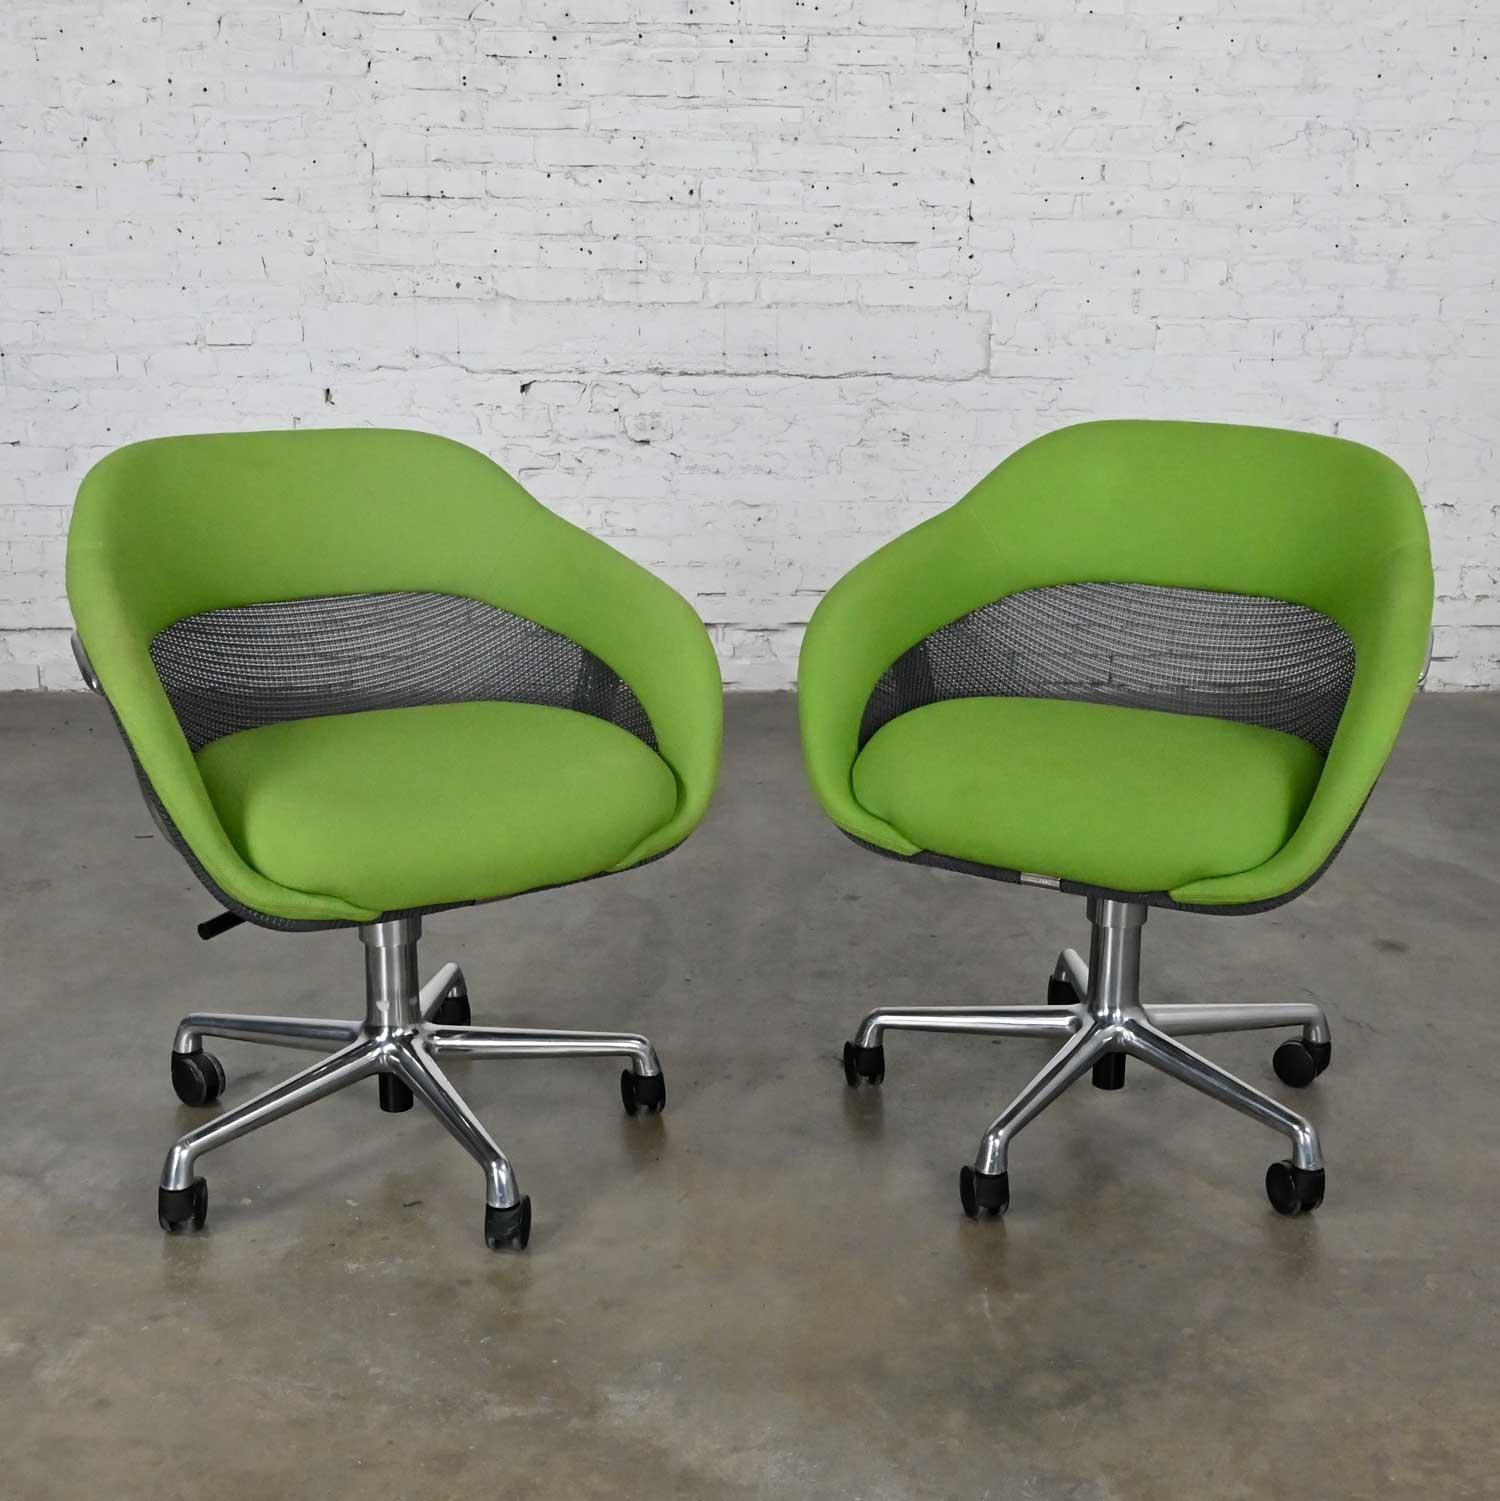 American Modern Steelcase Green 5 Prong Chrome Rolling Base Coalesse Office Chairs a Pair